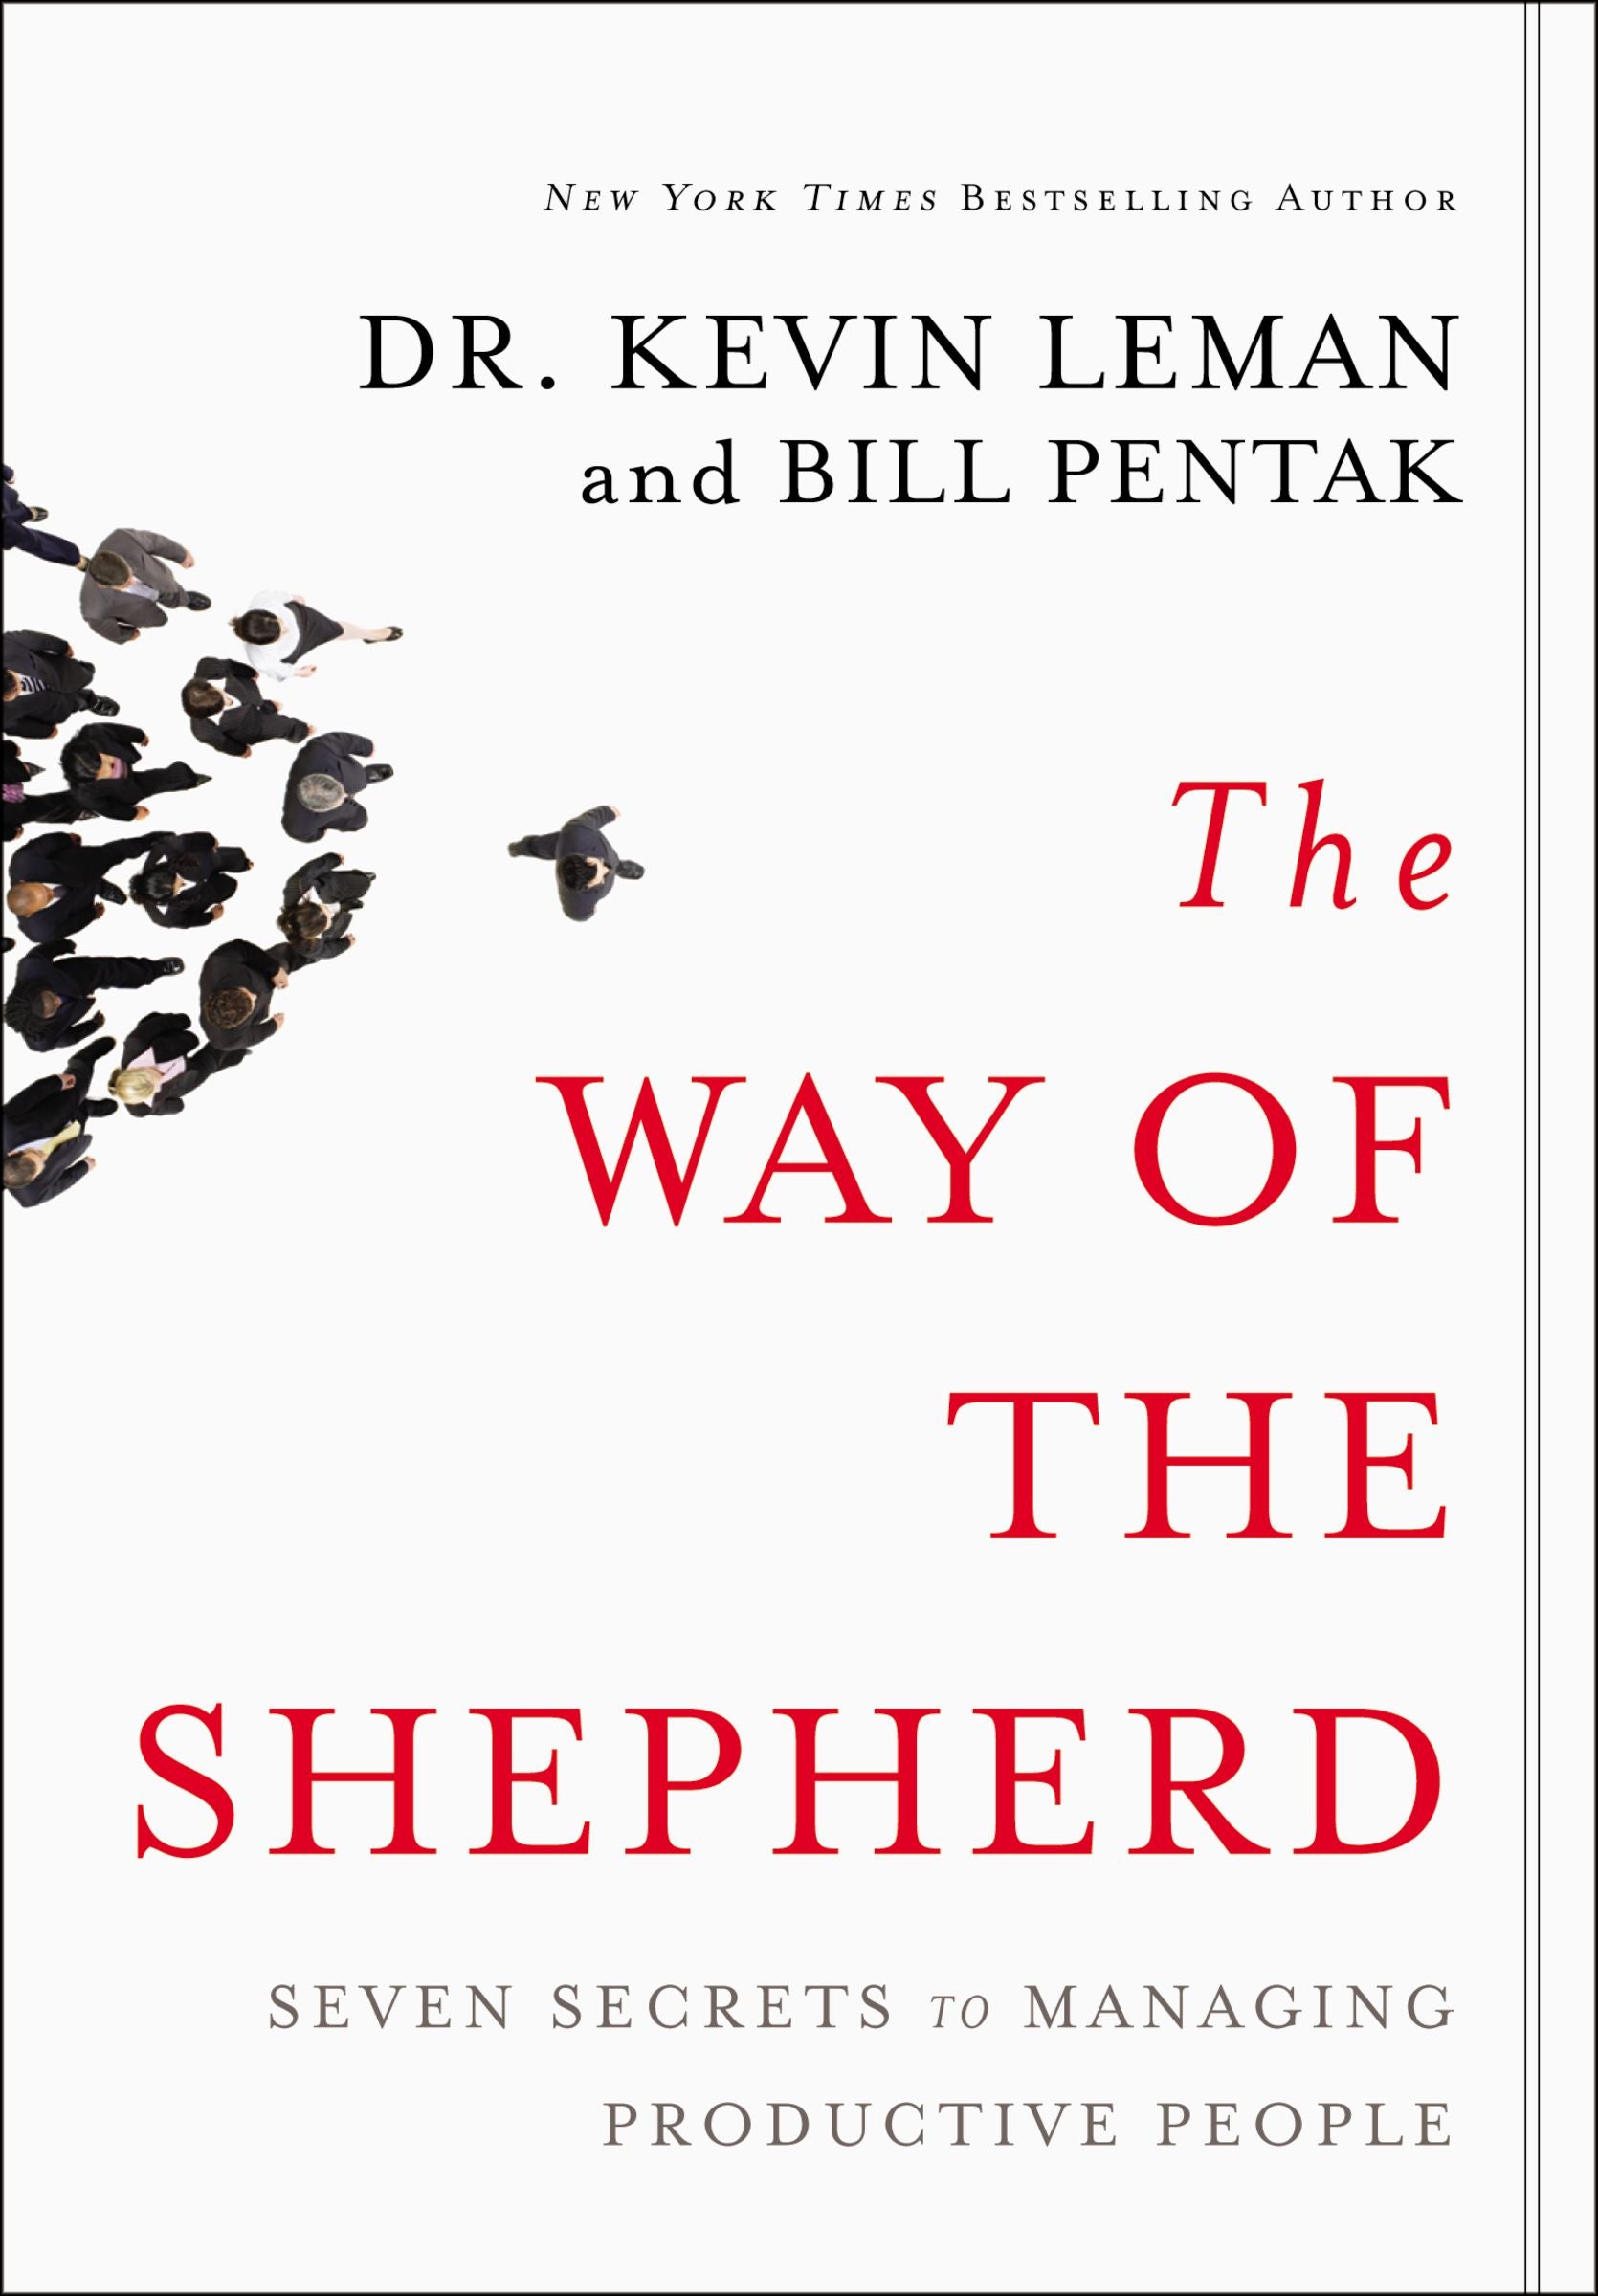 Image of The Way of the Shepherd: 7 Ancient Secrets to Managing Productive People other